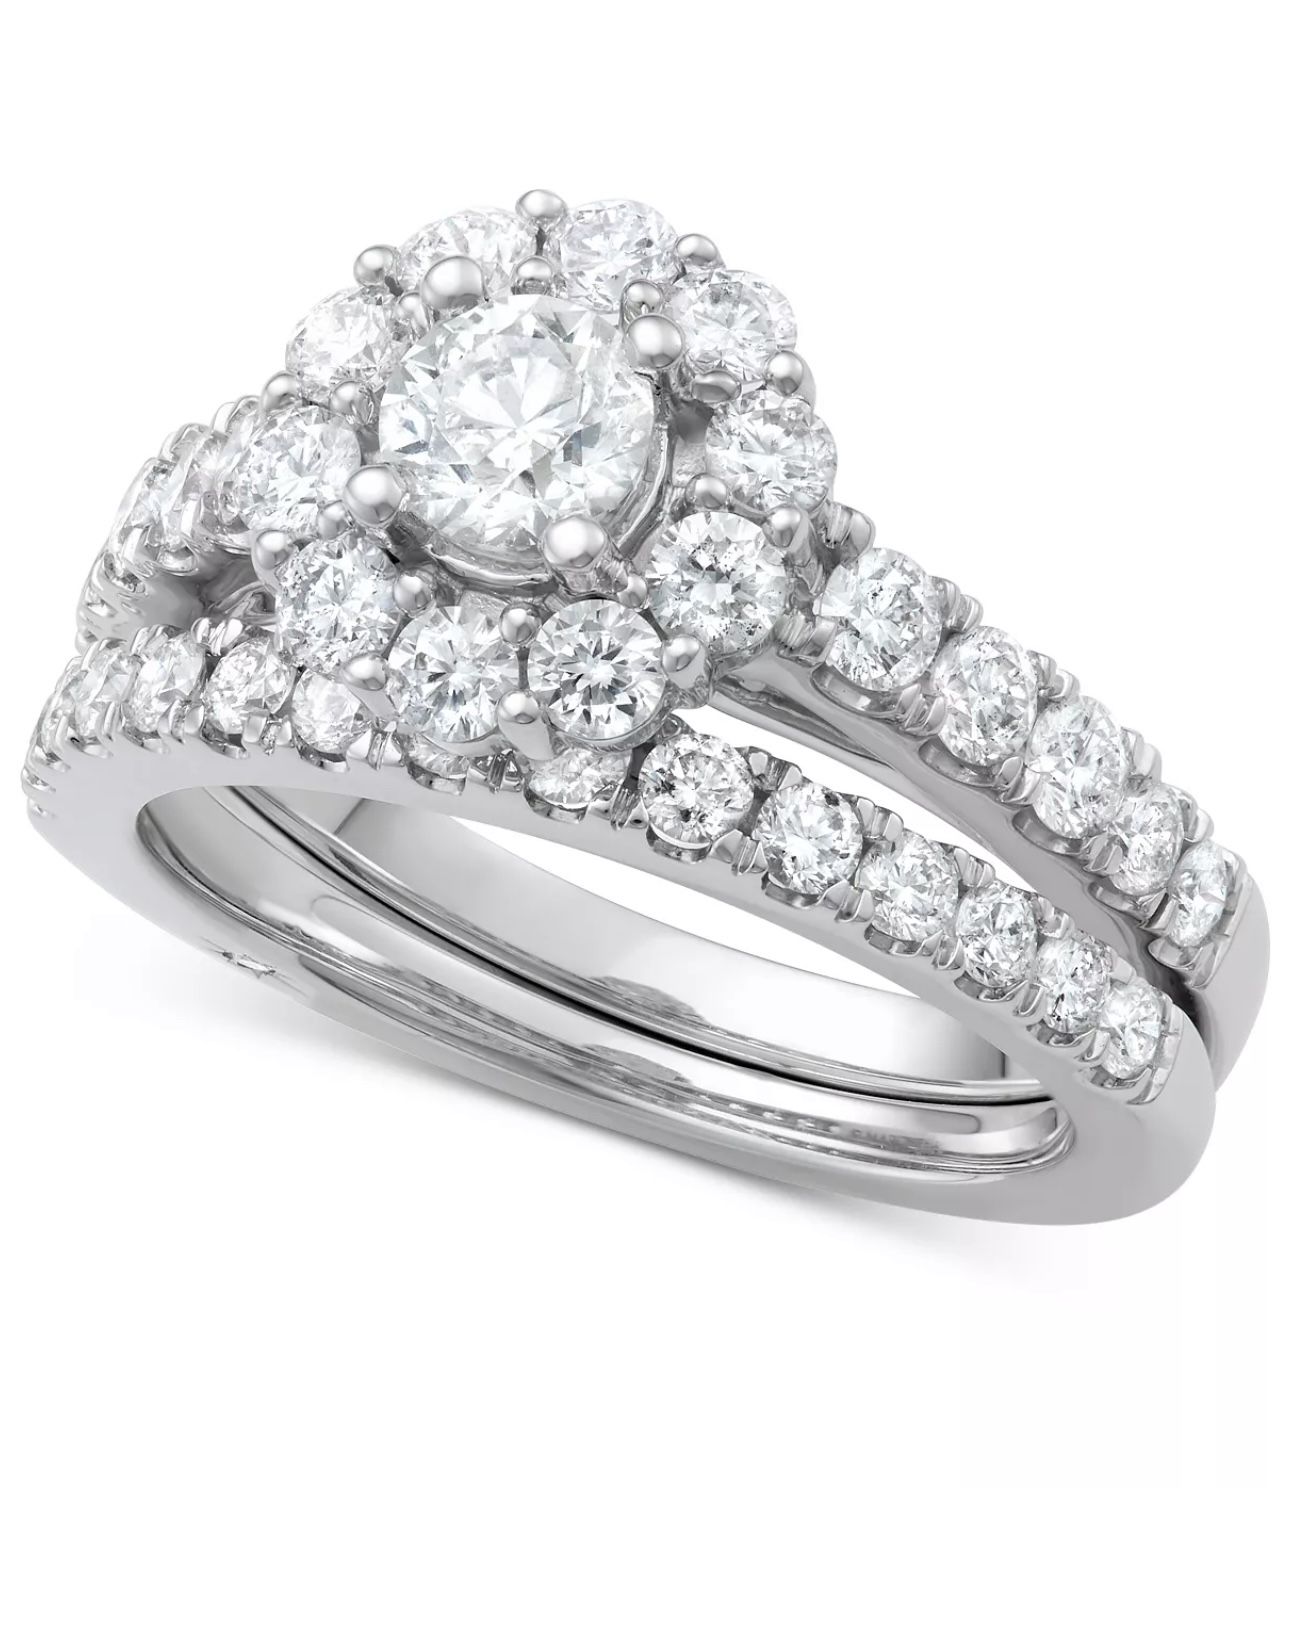 Certified Round Halo Diamond Ring in 18k Gold, White Gold, Size 5.75